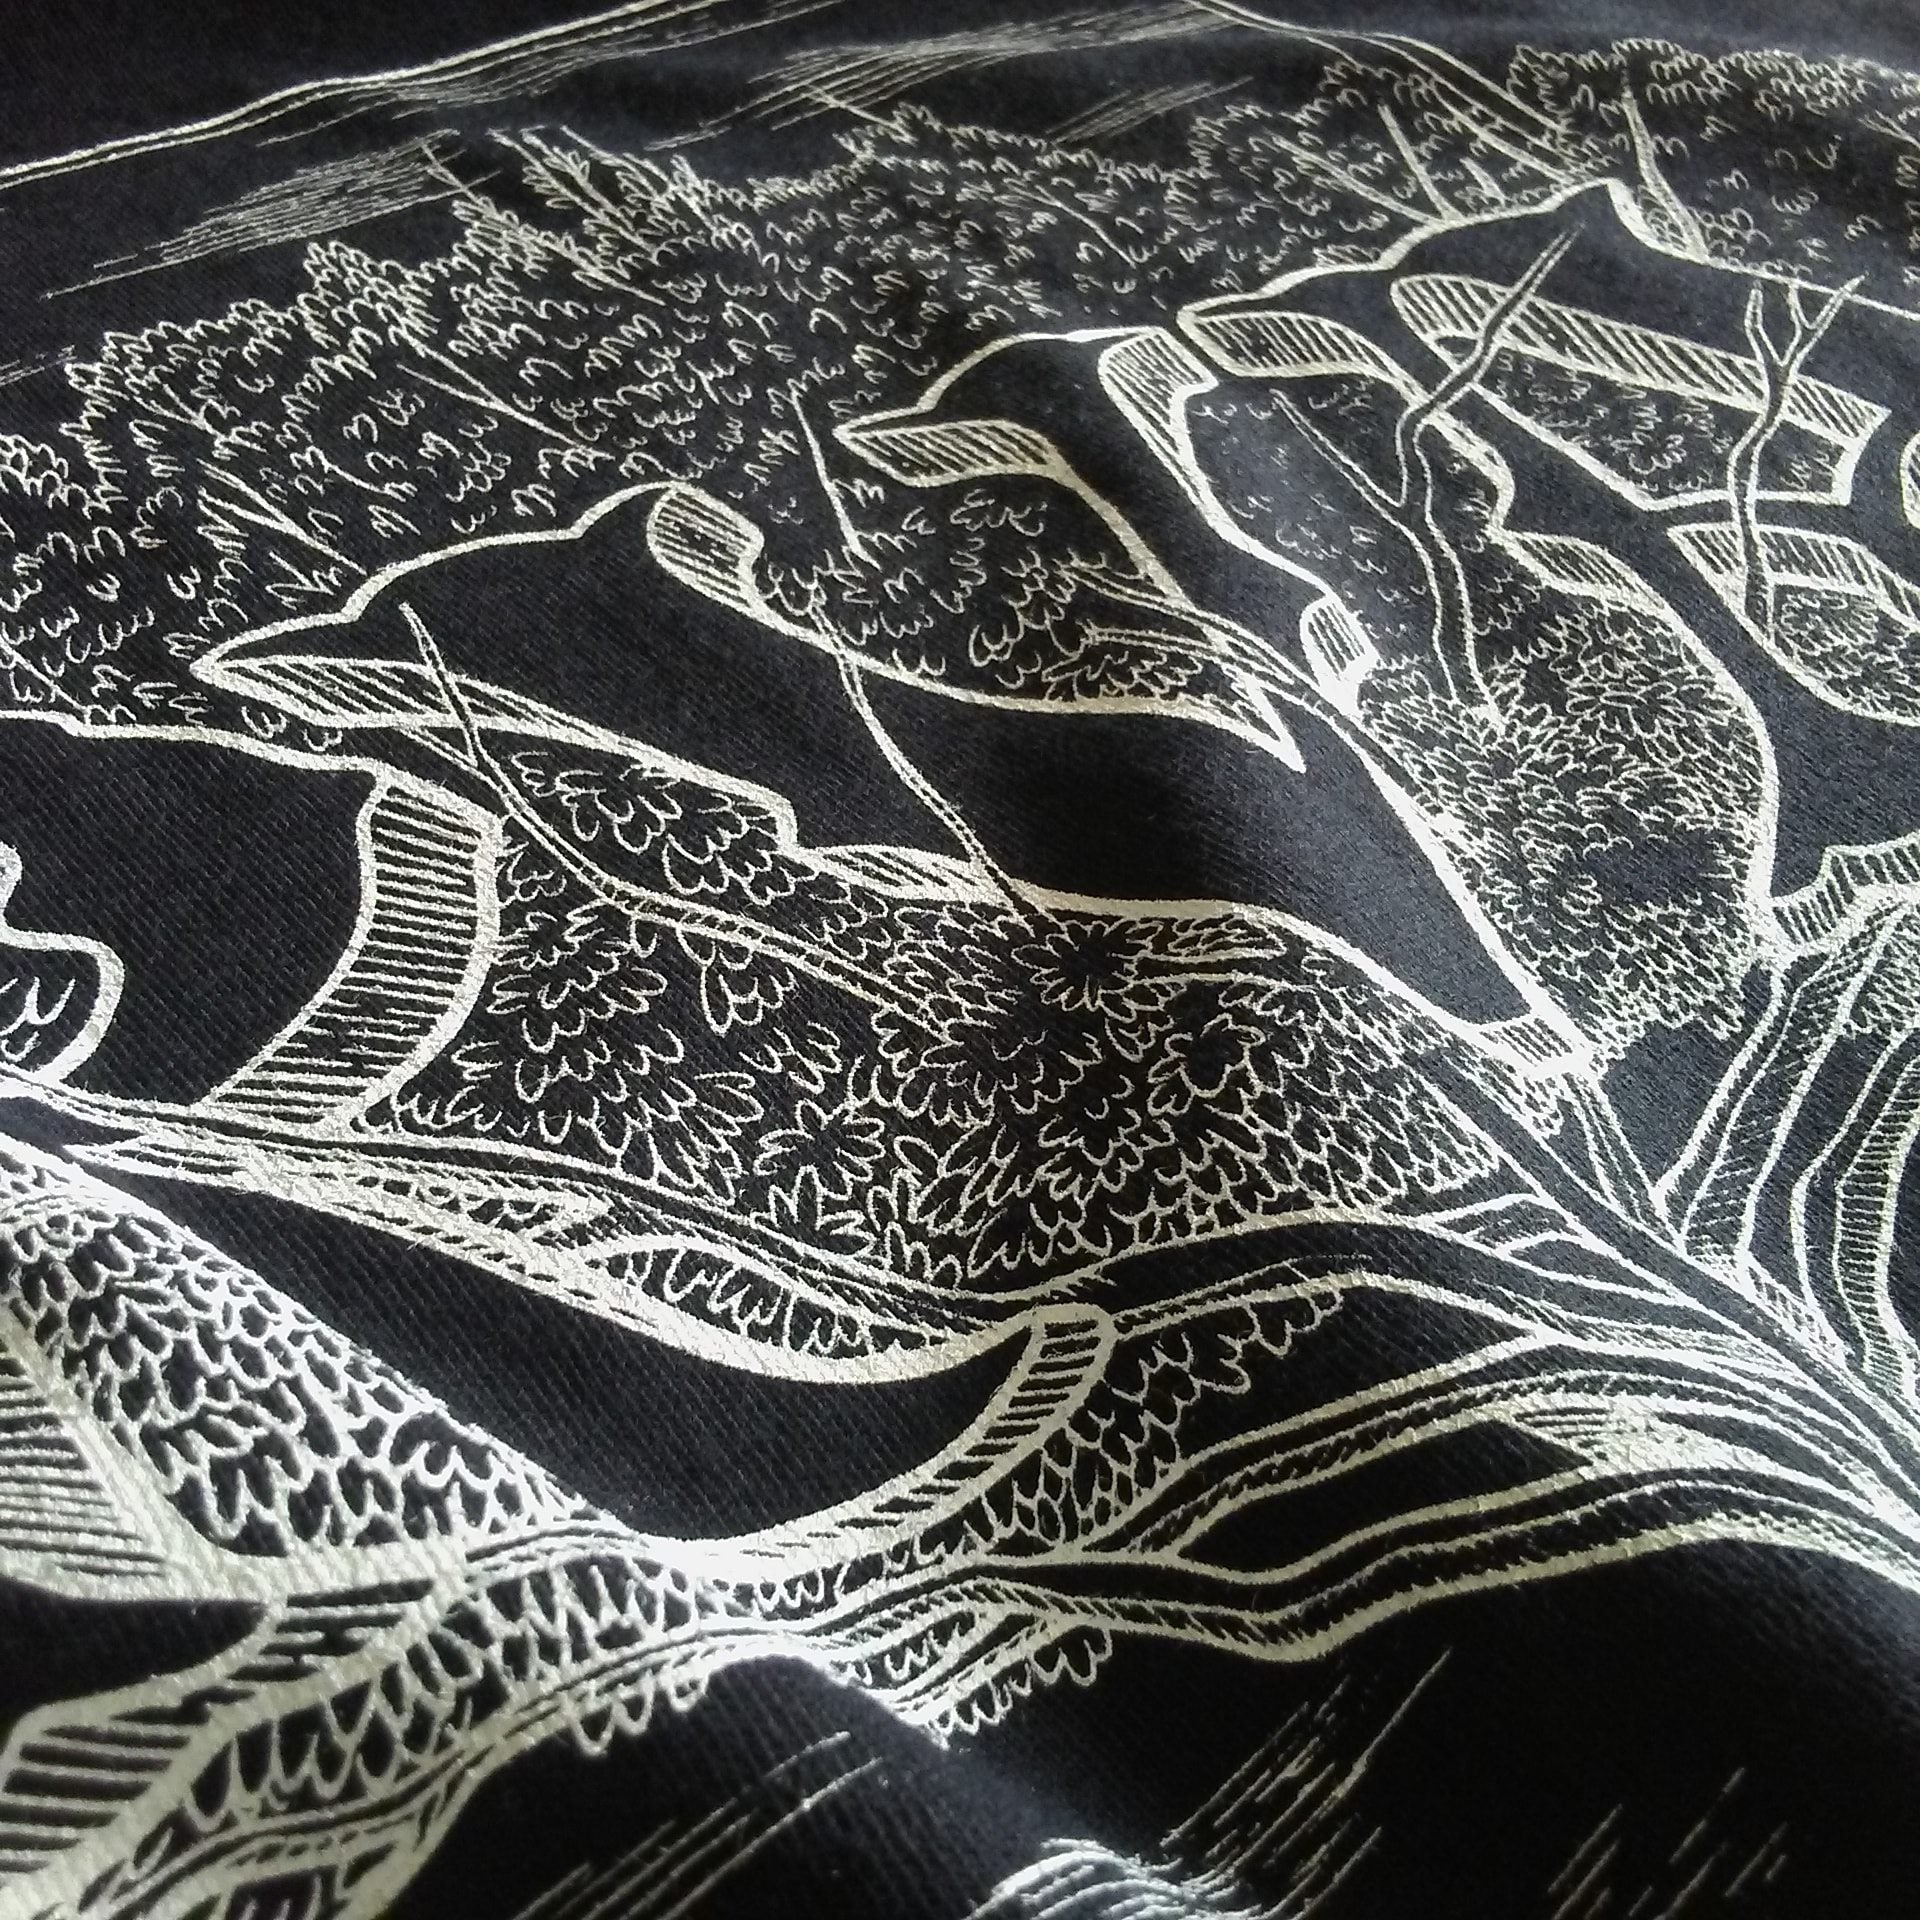 RVA rooted design screen printed on black t-shirt.